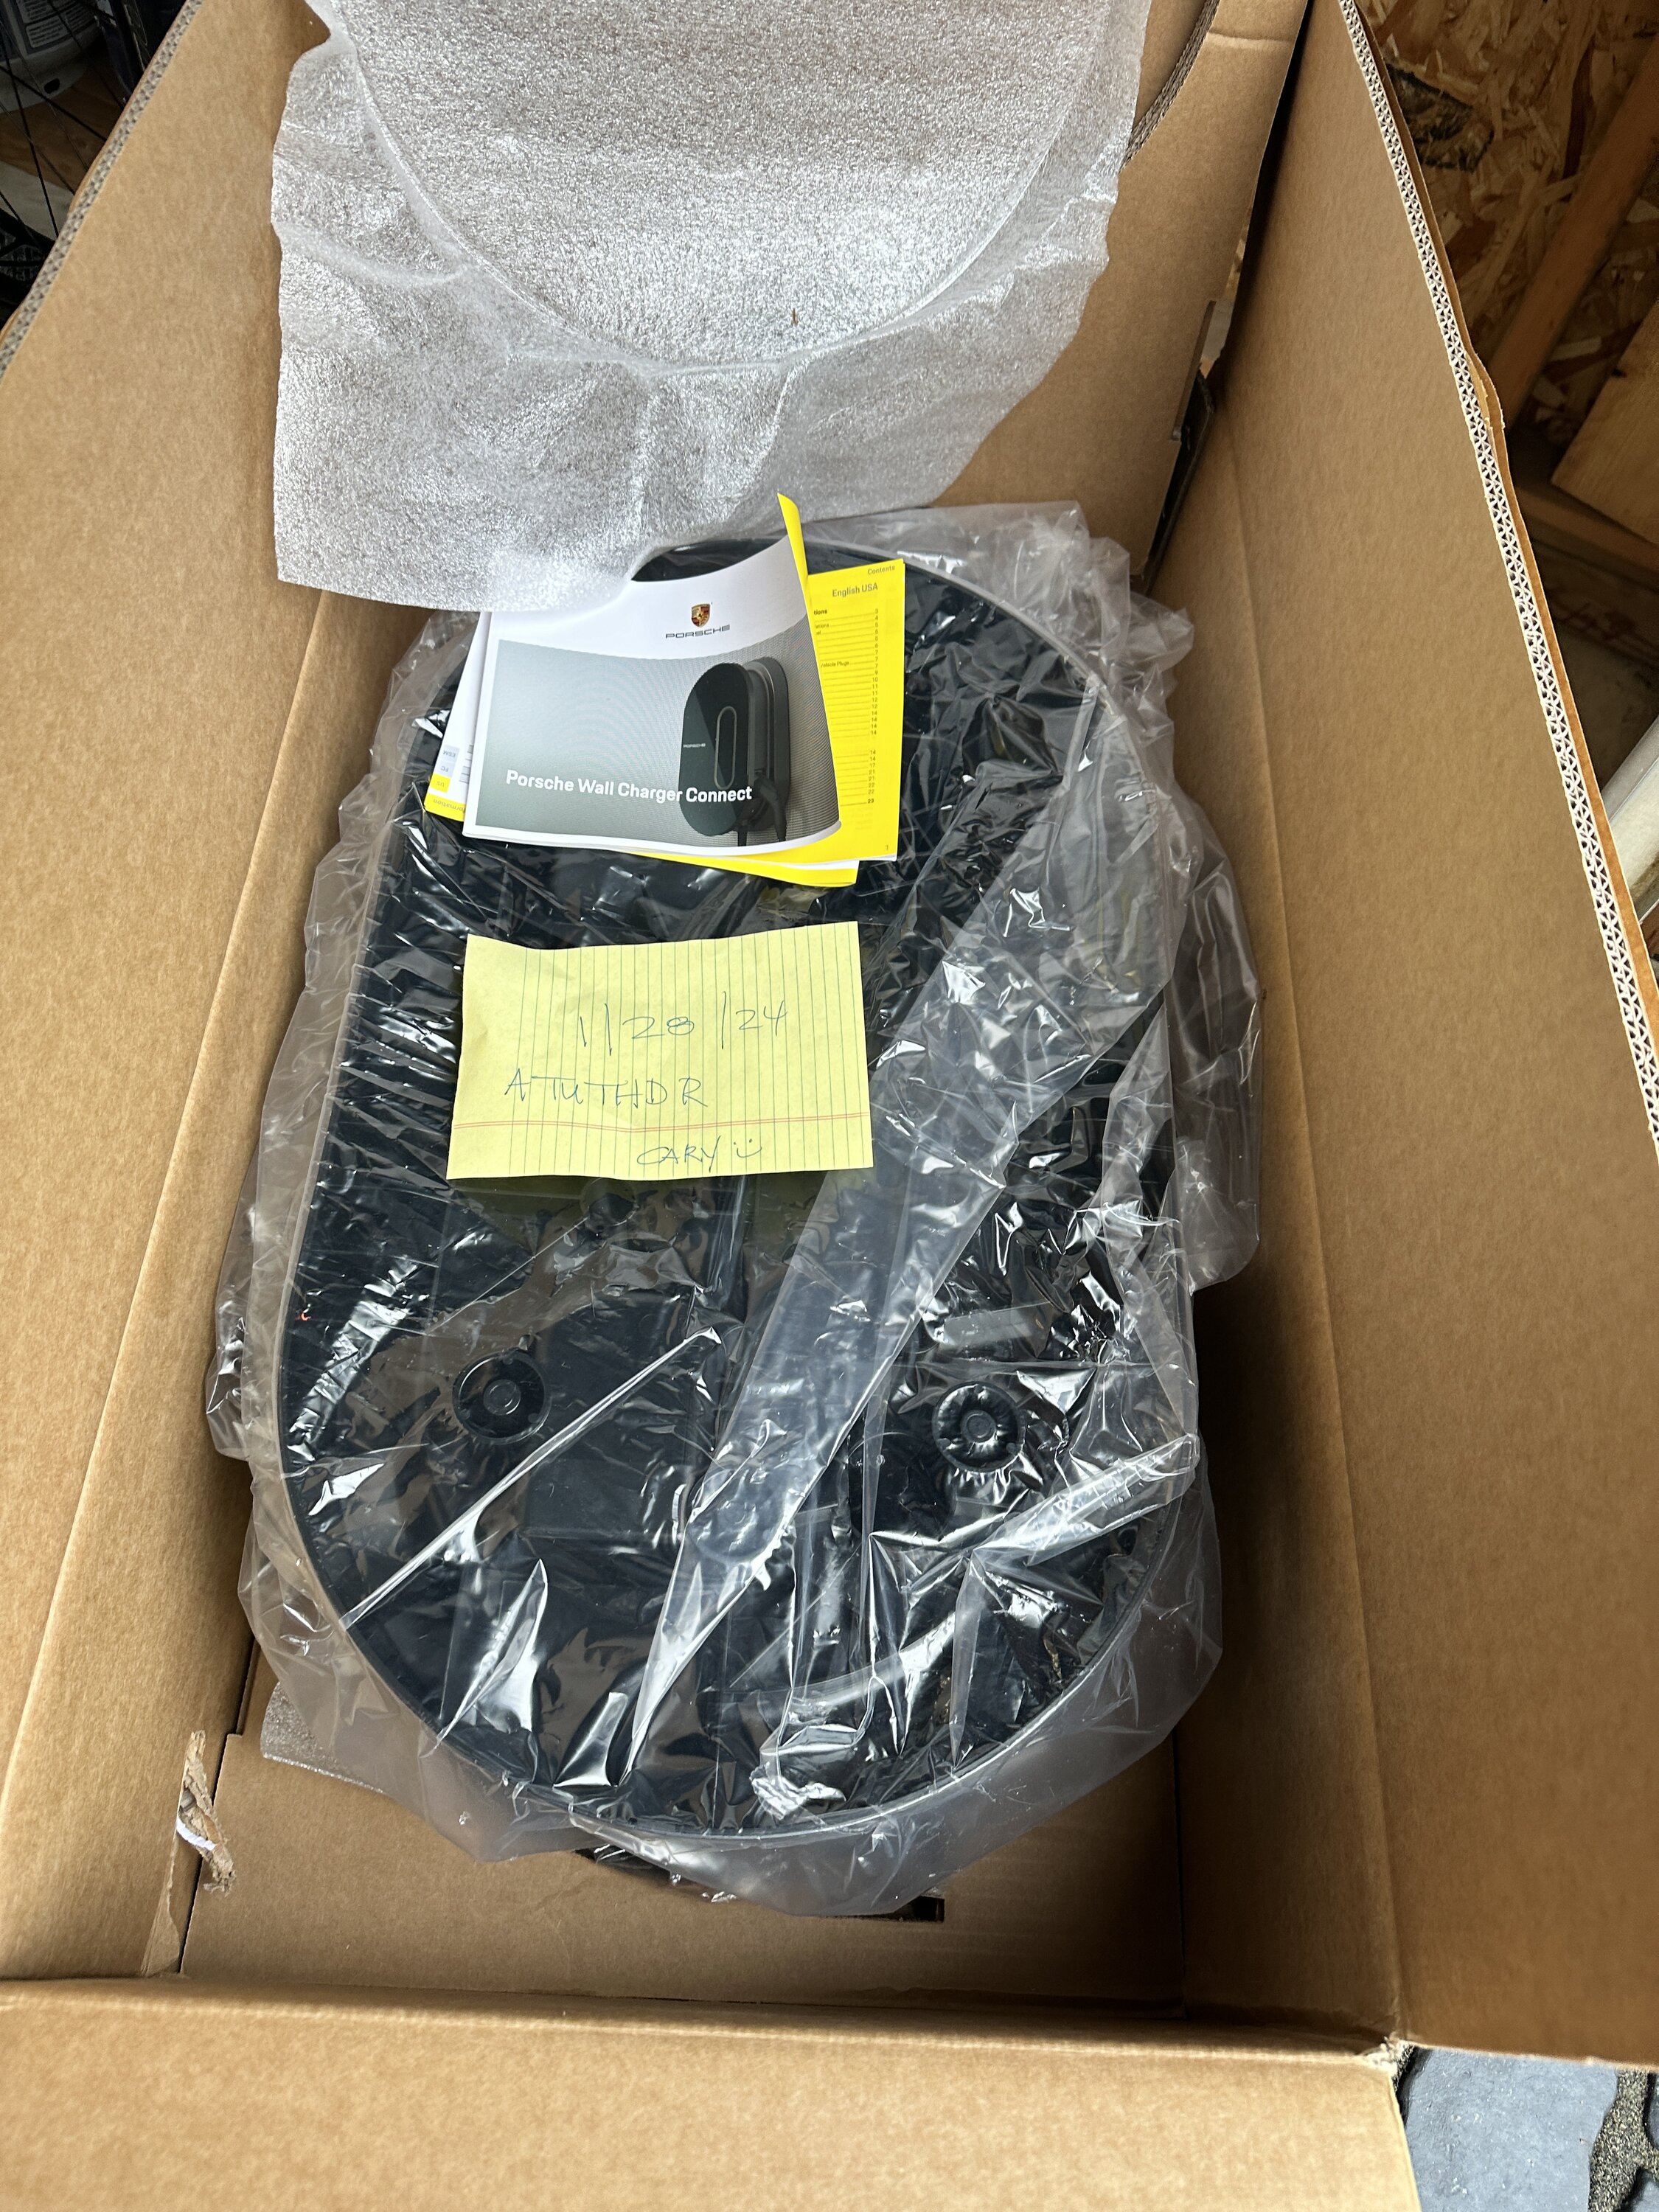 Macan EV Porsche Wall Charger Connect-New In Box $750 plus shipping IMG_4685